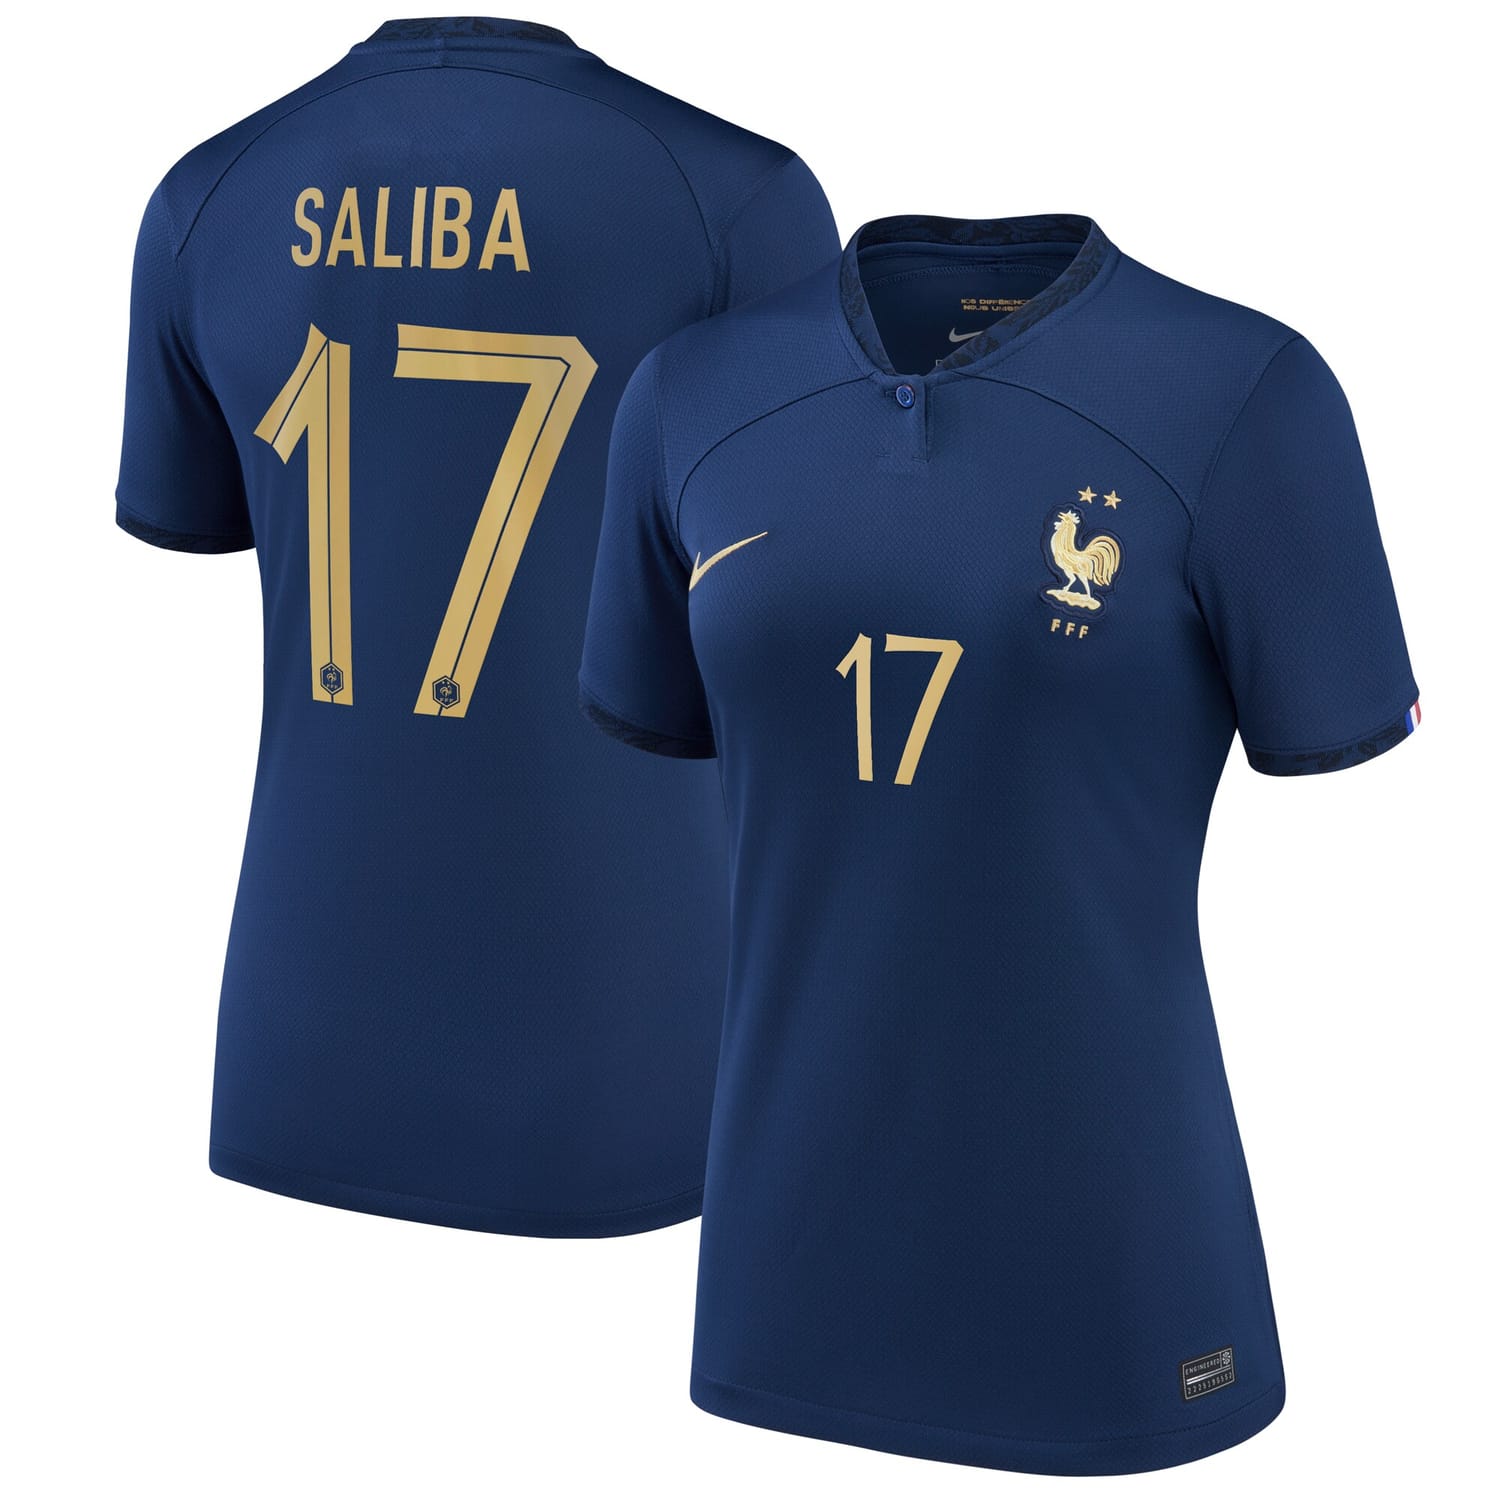 France National Team Home Jersey Shirt 2022 player William Saliba 17 printing for Women